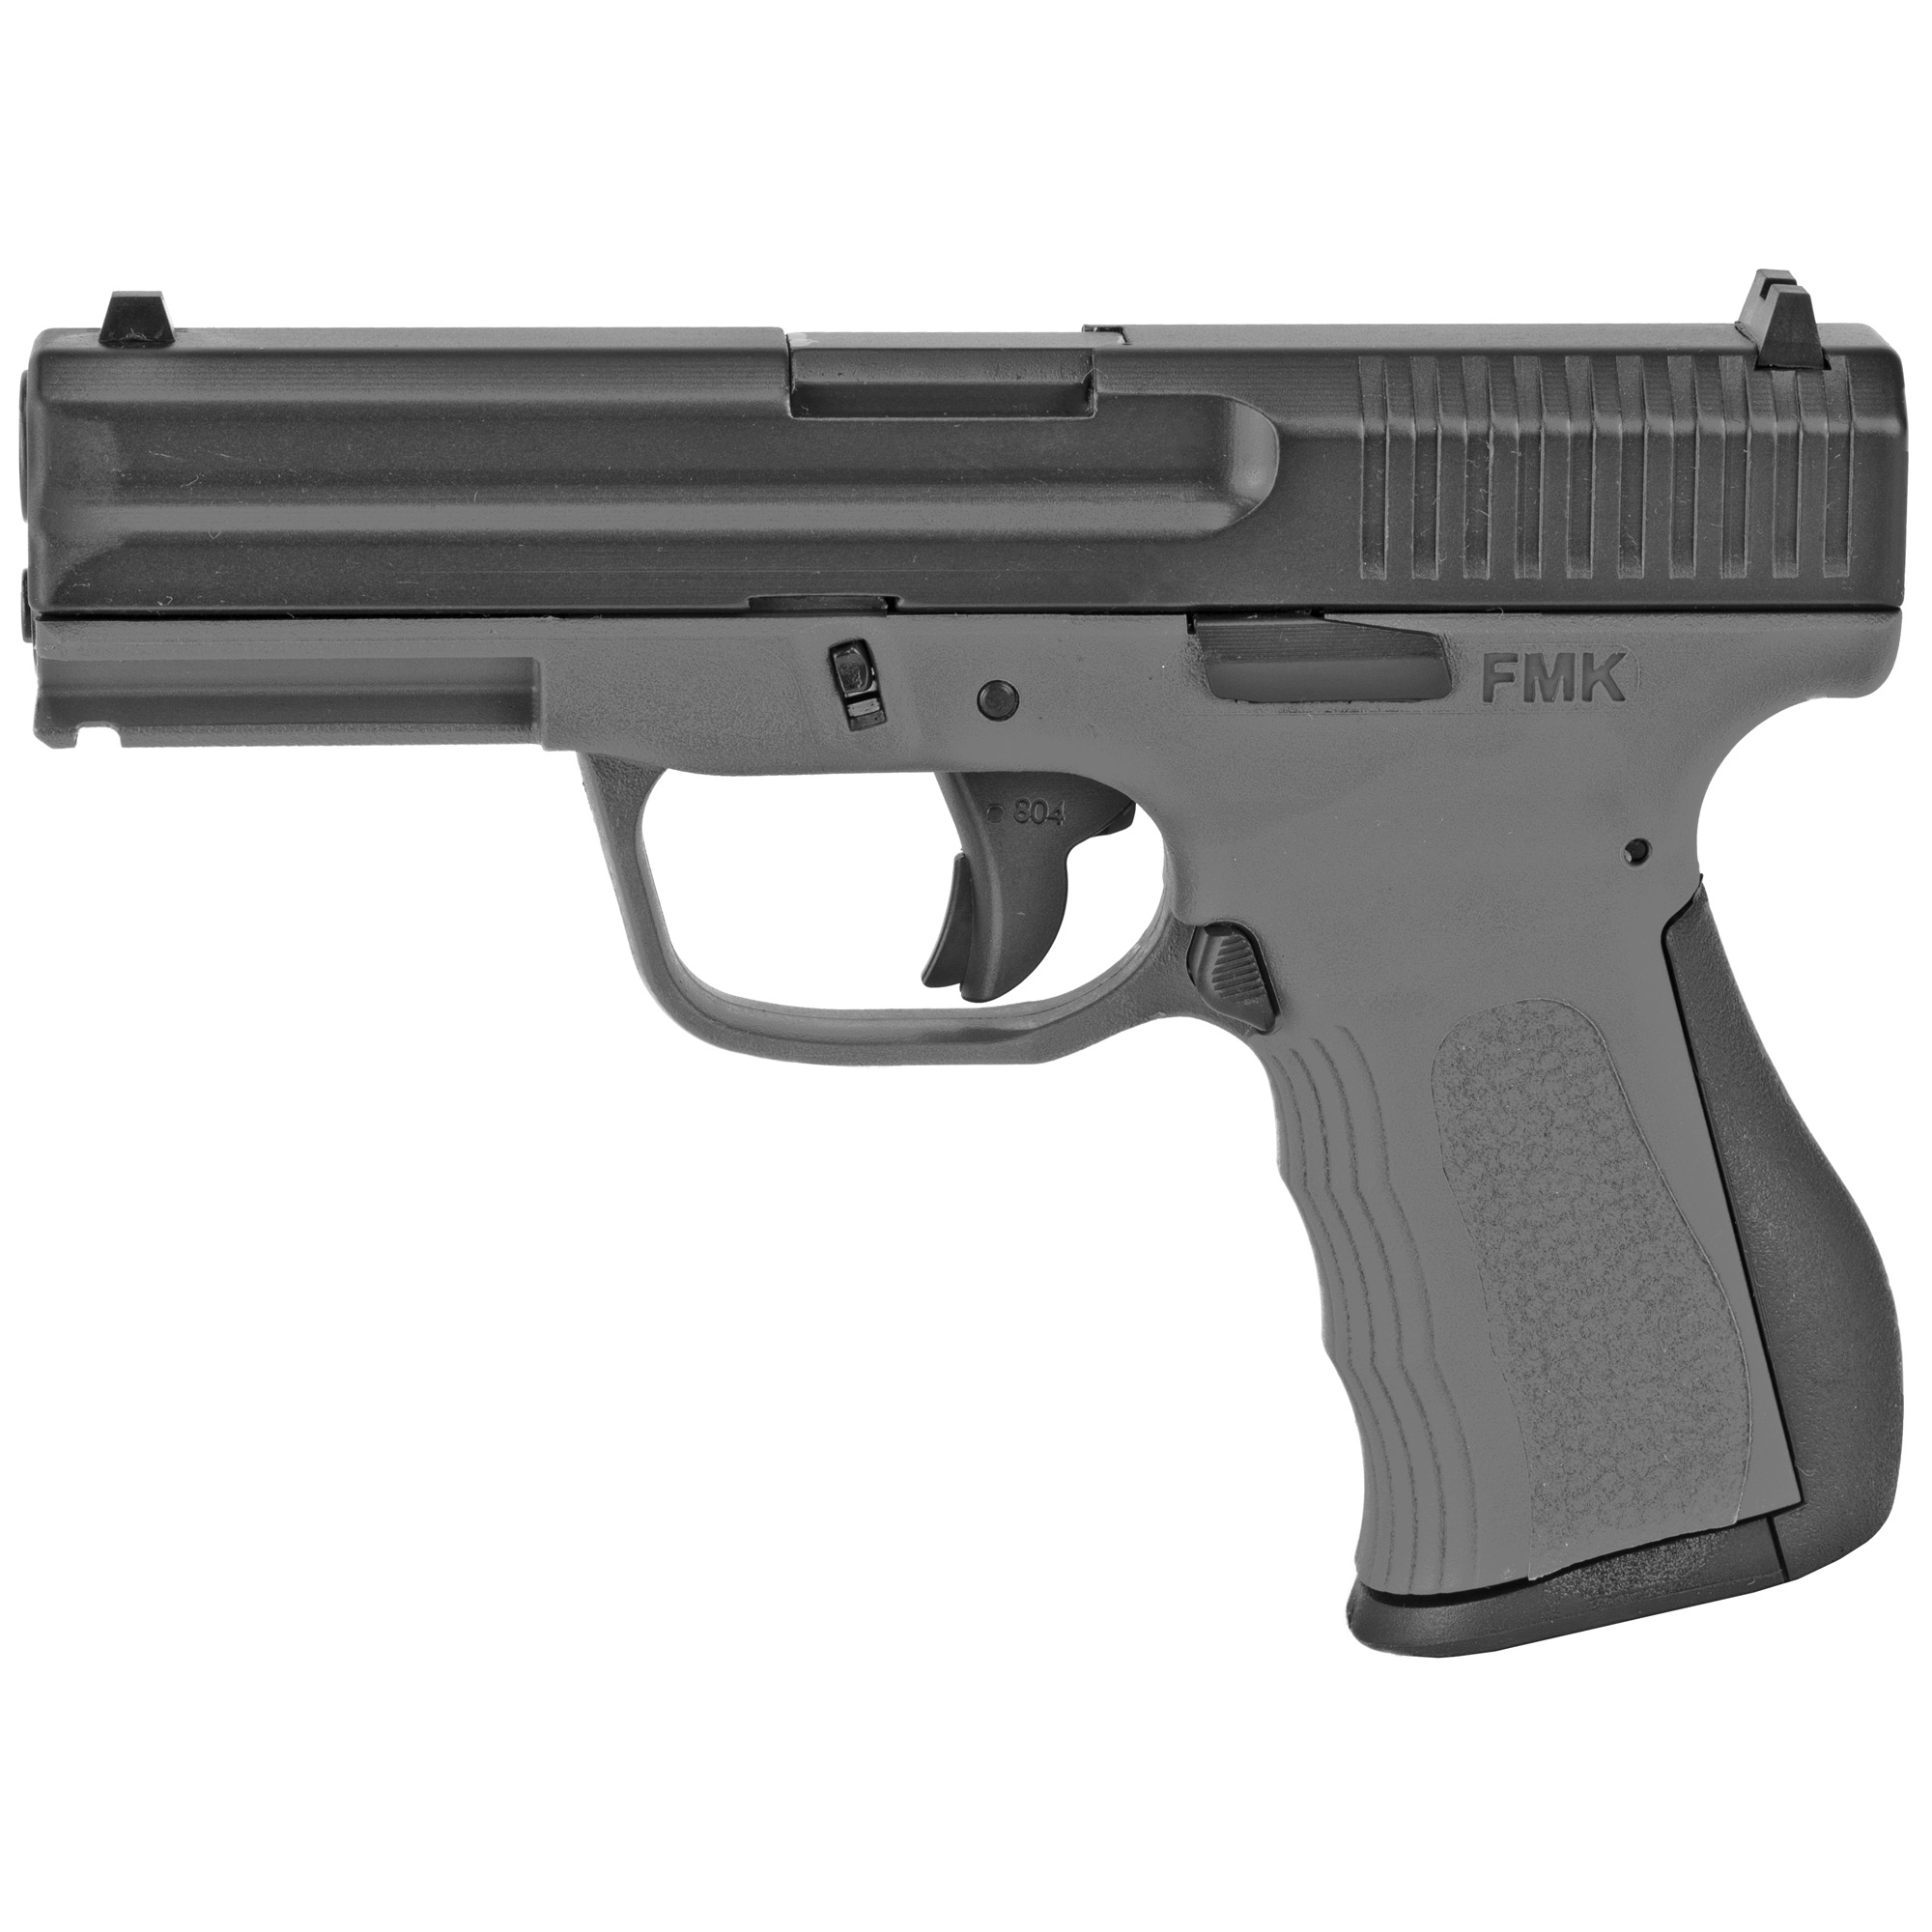 FMK 9C1G2 9MM 4 14RD 2 MAGS GRY